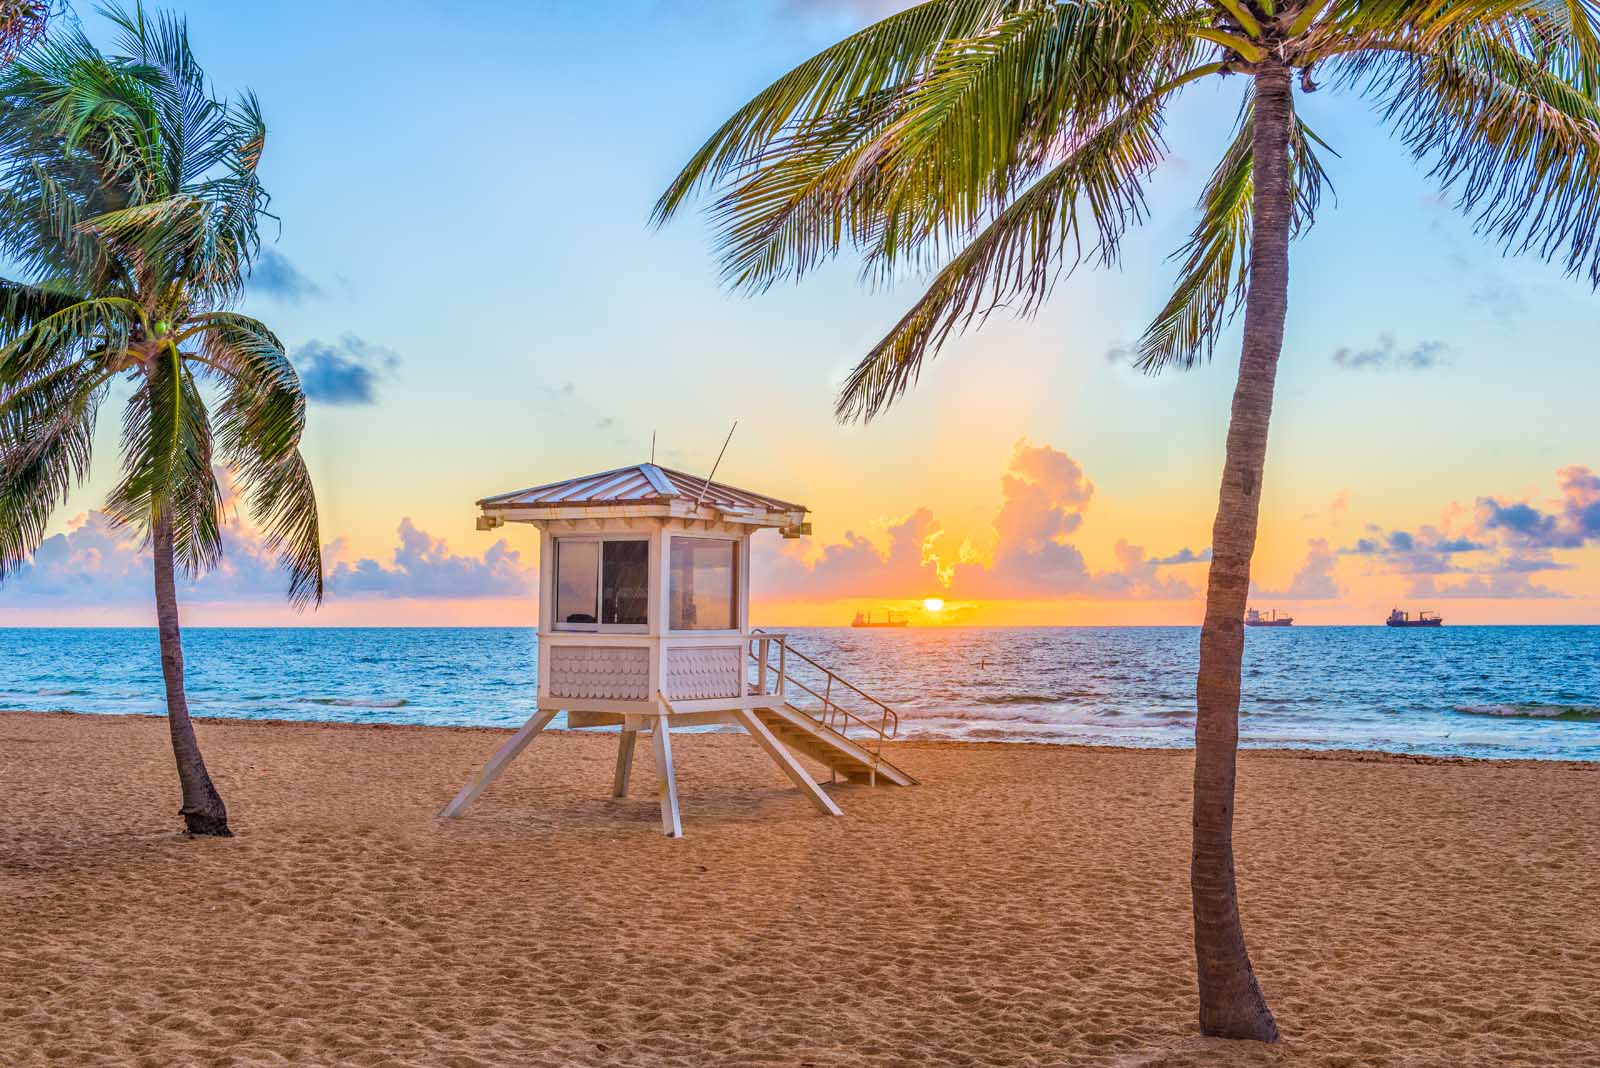 Best Things to do in Fort Lauderdale Florida